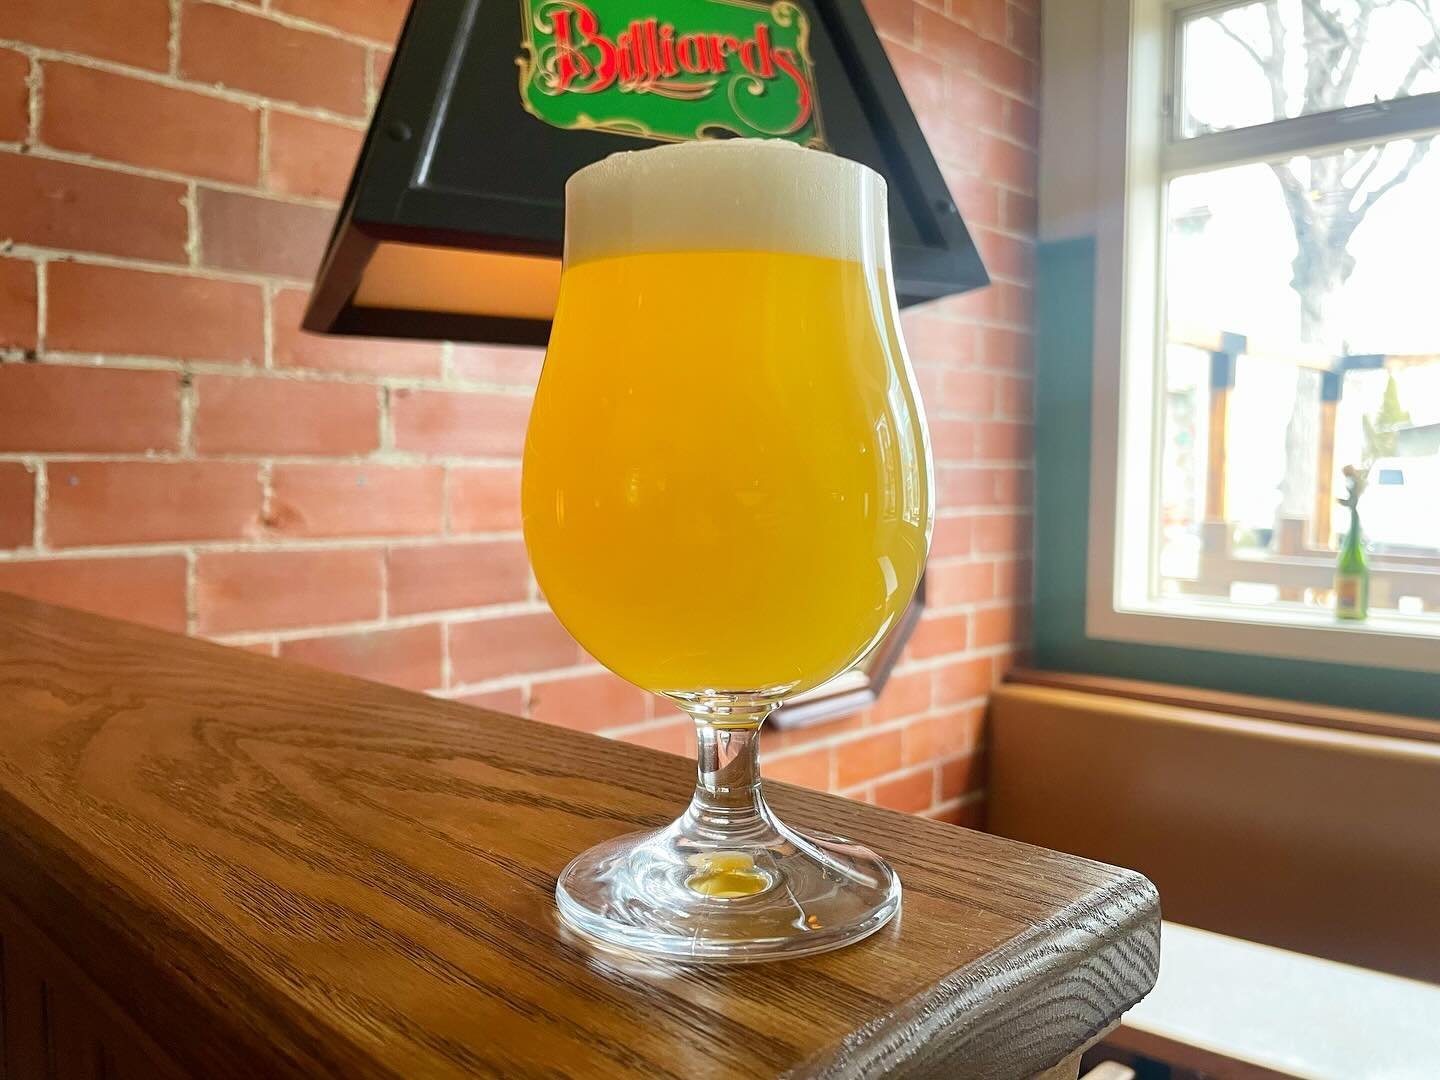 Ohh yeah! Juicy, sour Mango Gose from @burdockbrewery is on tap now. Maximum refreshement guaranteed!🧂🥭✨

Look out for more new arrivals from Burdock this weekend! 🍻